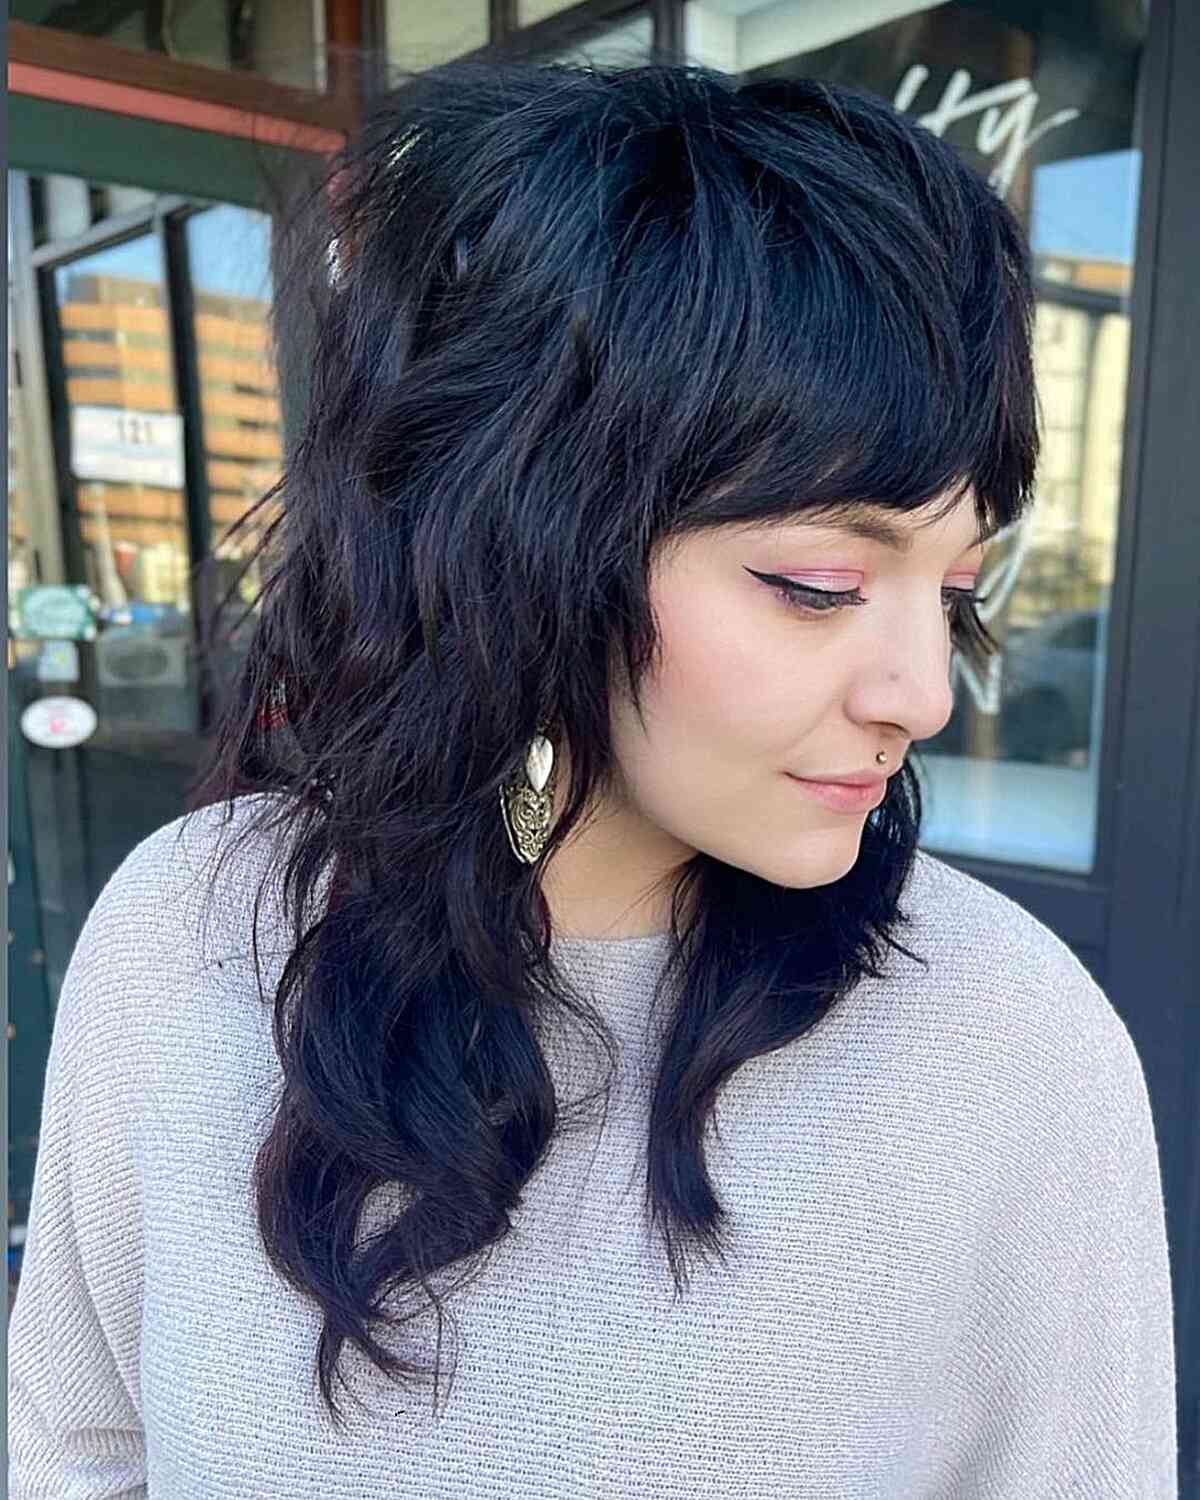 Mid-Length Shag with Big Volume and Bangs for ladies with dark wavy hair